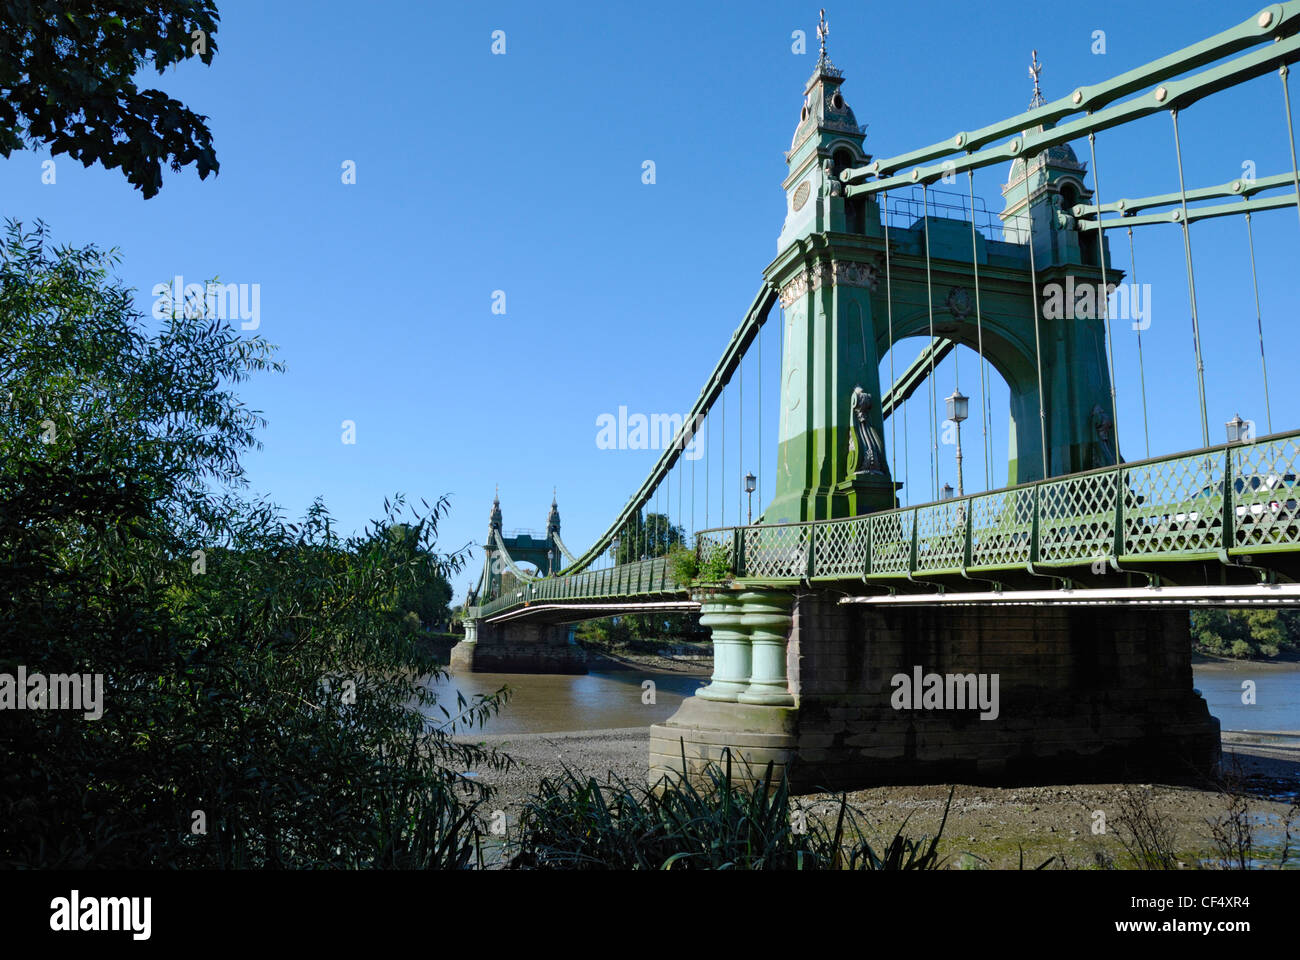 Hammersmith Bridge, built in 1887, over the River Thames linking Barnes on the south side to Hammersmith on the north side. Stock Photo